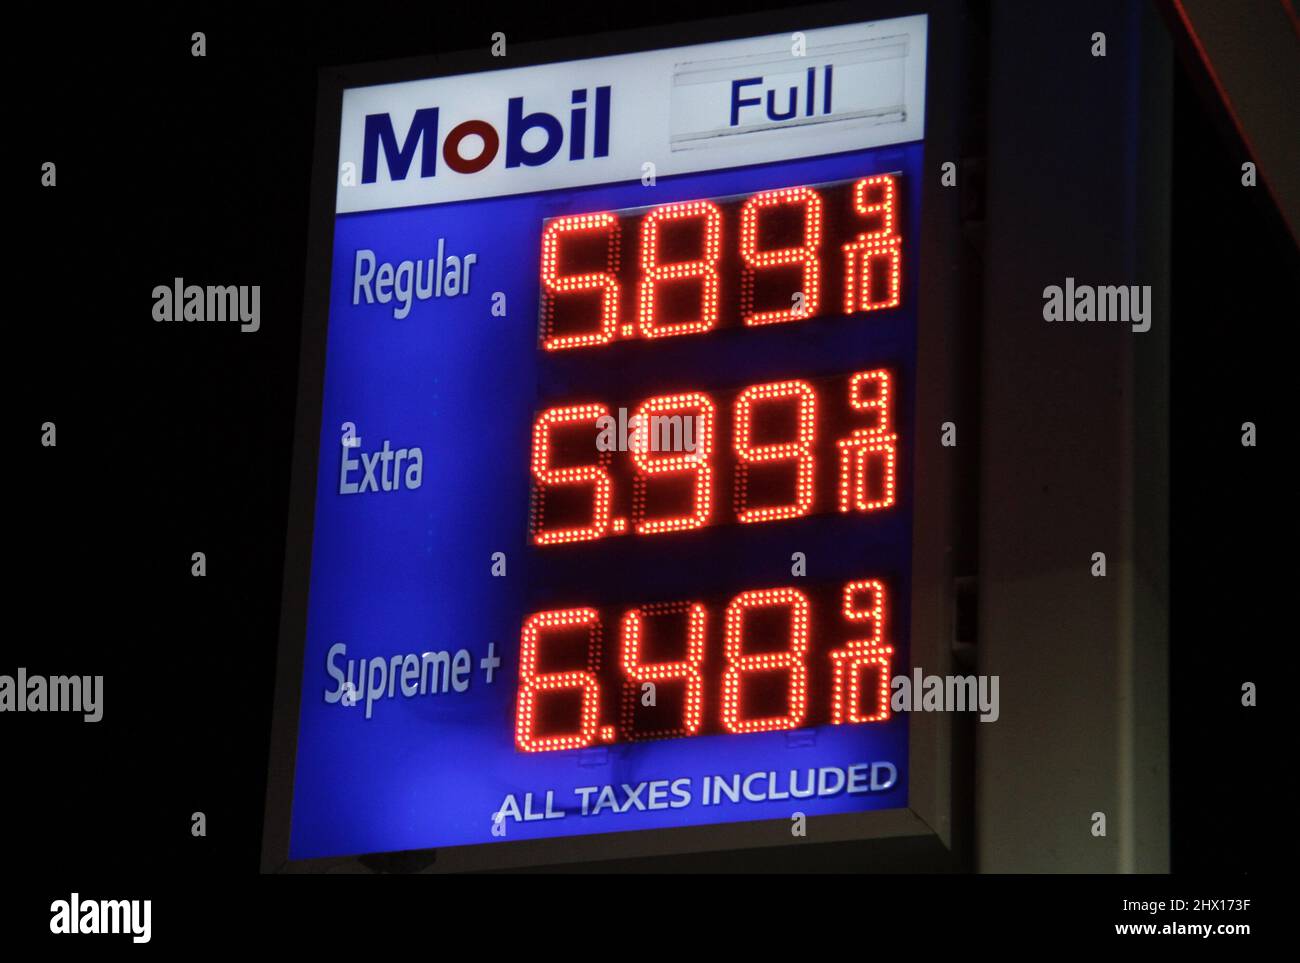 March 8, 2022, %G: (NEW) Average price of regular Gas reaches $5.89 in New York. March 8, 2022, New York, USA: The average price for a gallon of regular gas in New York reaches $5.89 breaking the previous record of $4.11 in 2008. The continuous and faster increase of gas prices in USA and around the world is due to the Russian invasion of Ukraine. The US President Joe Biden has banned the importation of Russian oil on Tuesday (08) which will definitely cause more increment to the gas price. Some of the customers at this Mobil gas station in Manhattan complained of the high price of gas and one Stock Photo